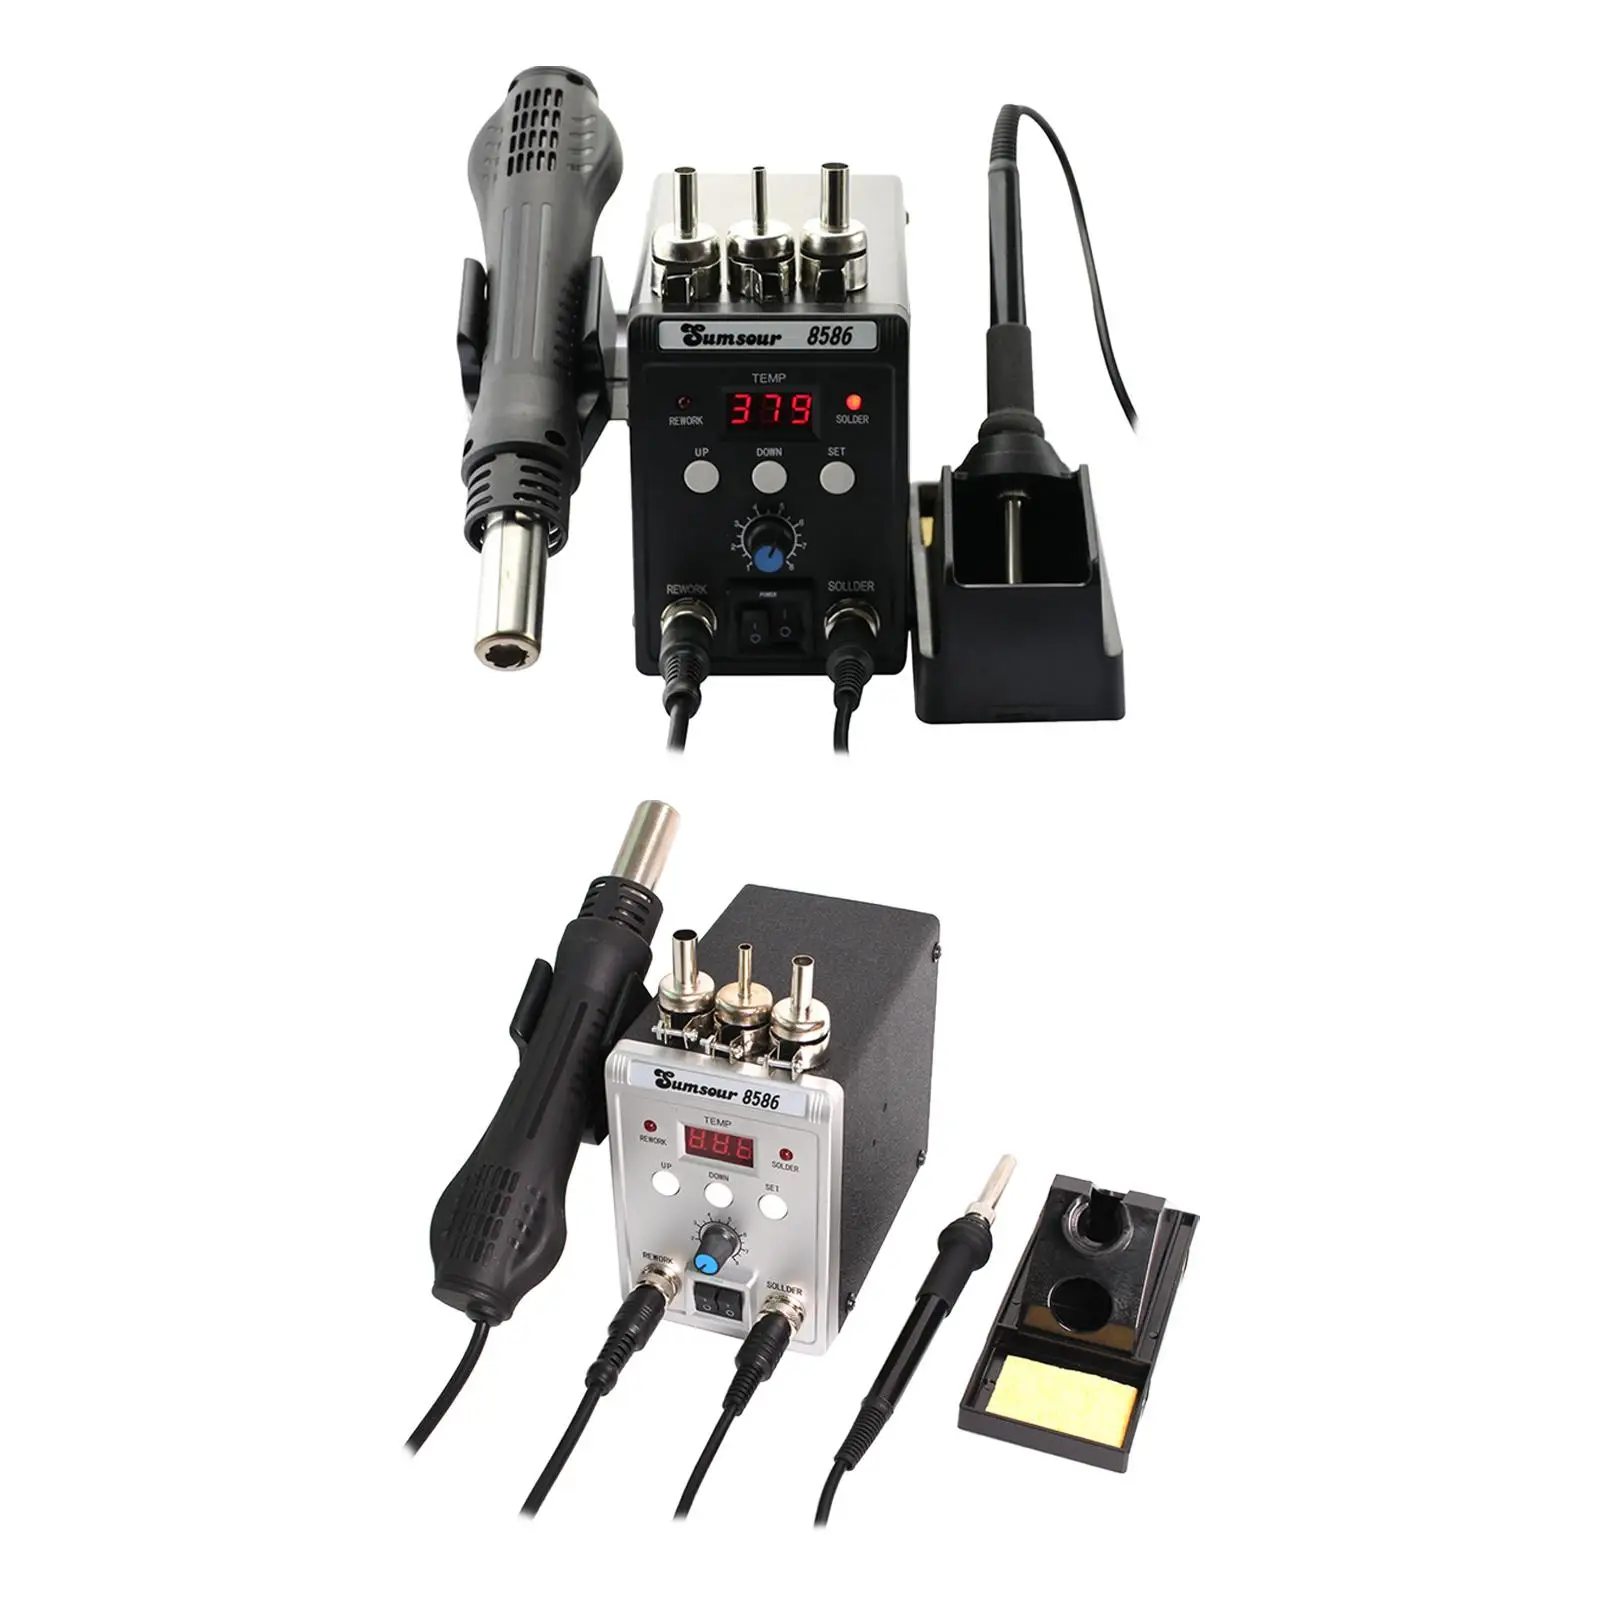 60W Soldering Iron Station with Metal Holder Professional Digital Soldering Station for DIY Repairs Home Appliance Maintenance